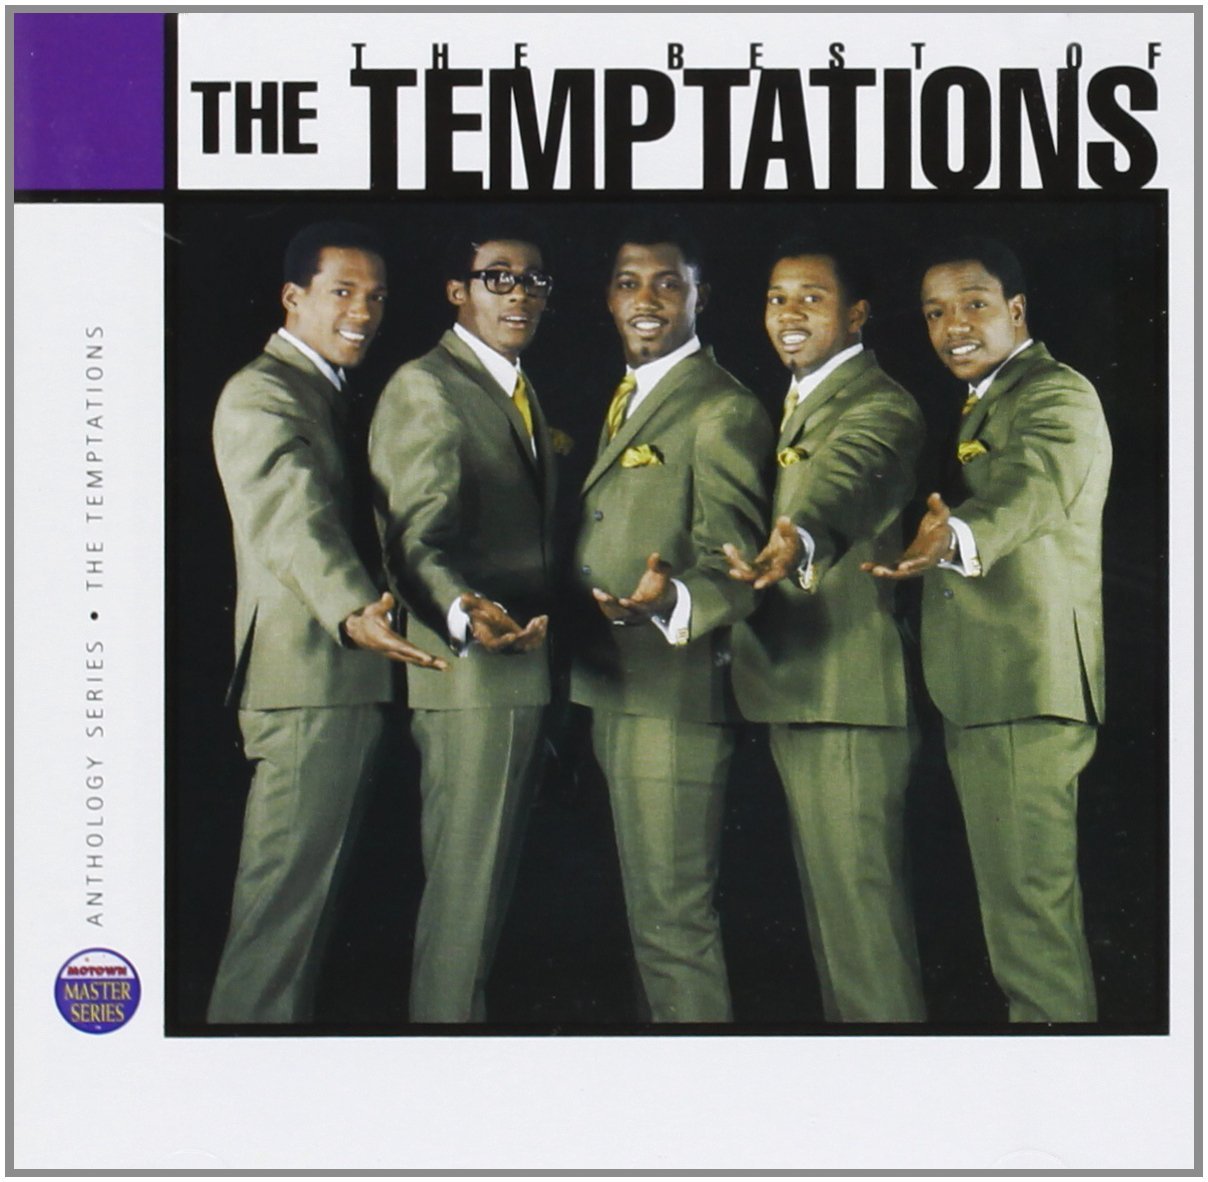 What are some popular Temptations songs?